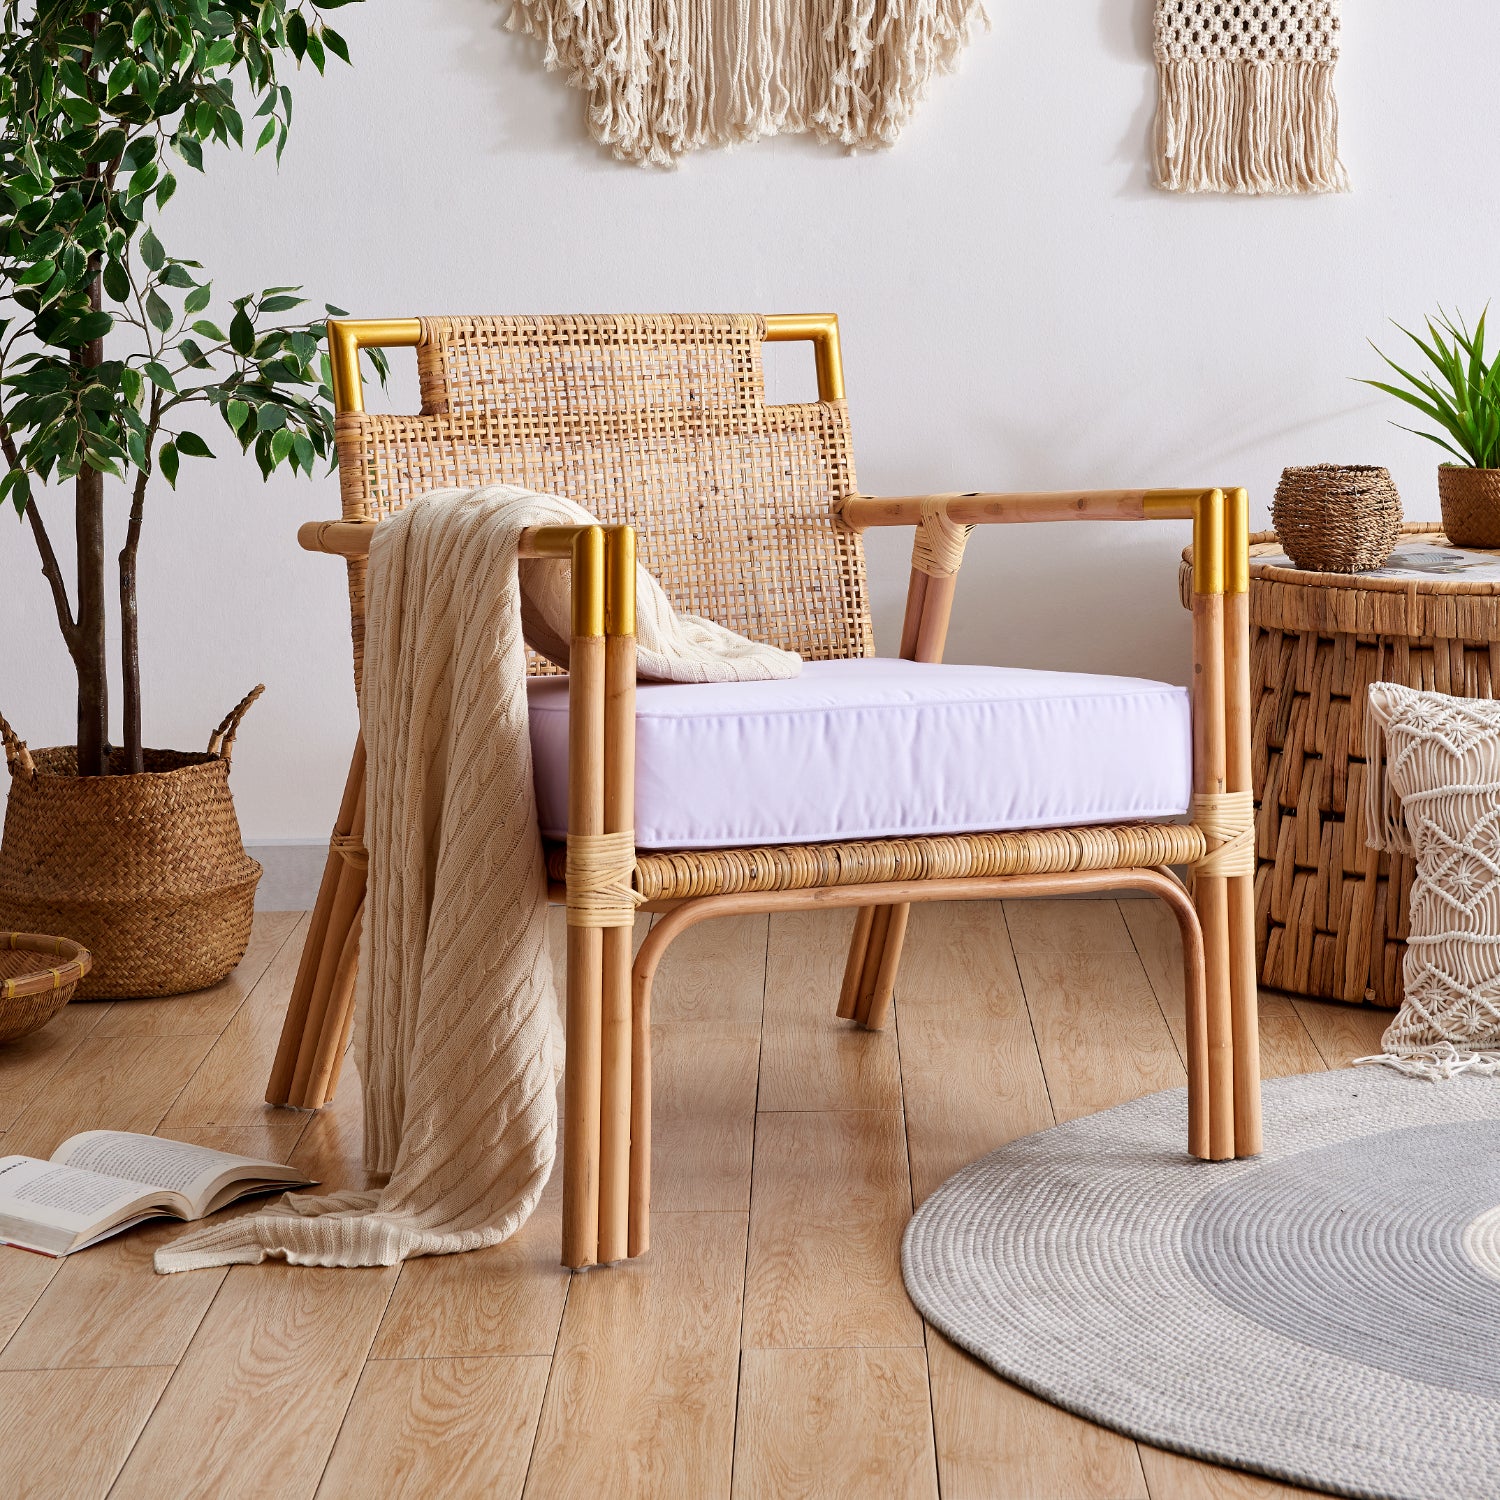 light and airy wicker chair with white cushion and beige throw. Set in a coastal themed room with macrame and potted plant decor.